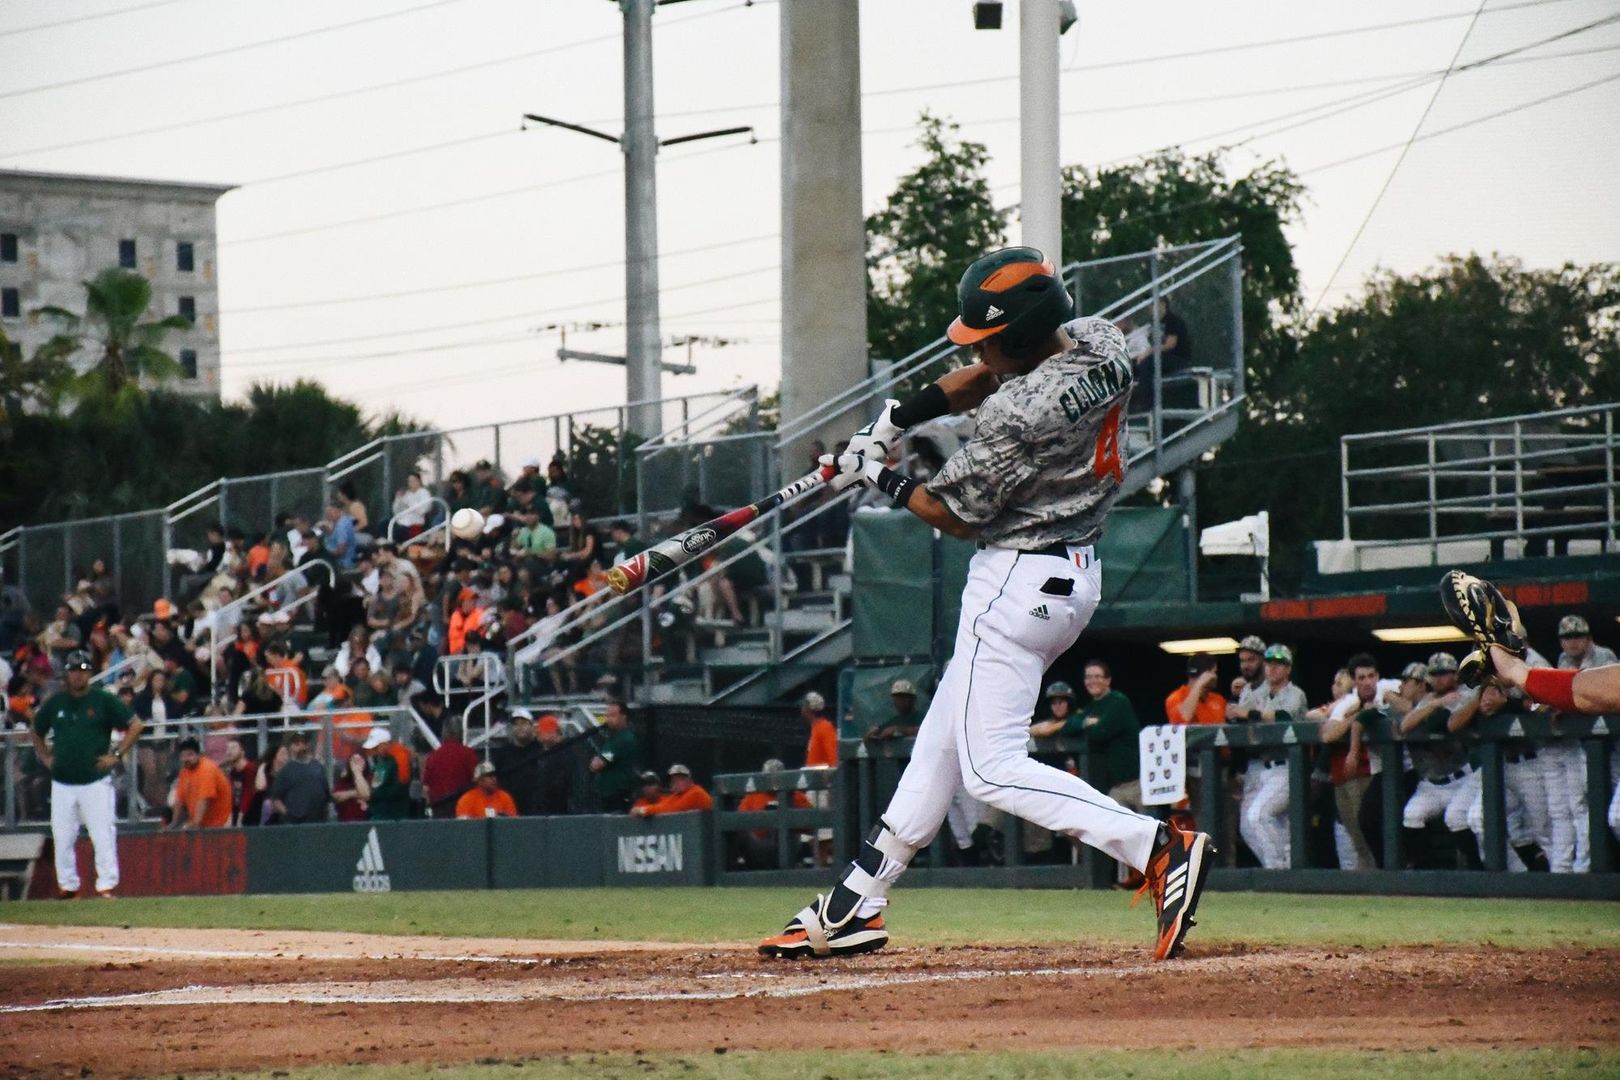 Canes Rally in Ninth Falls Short, 7-6